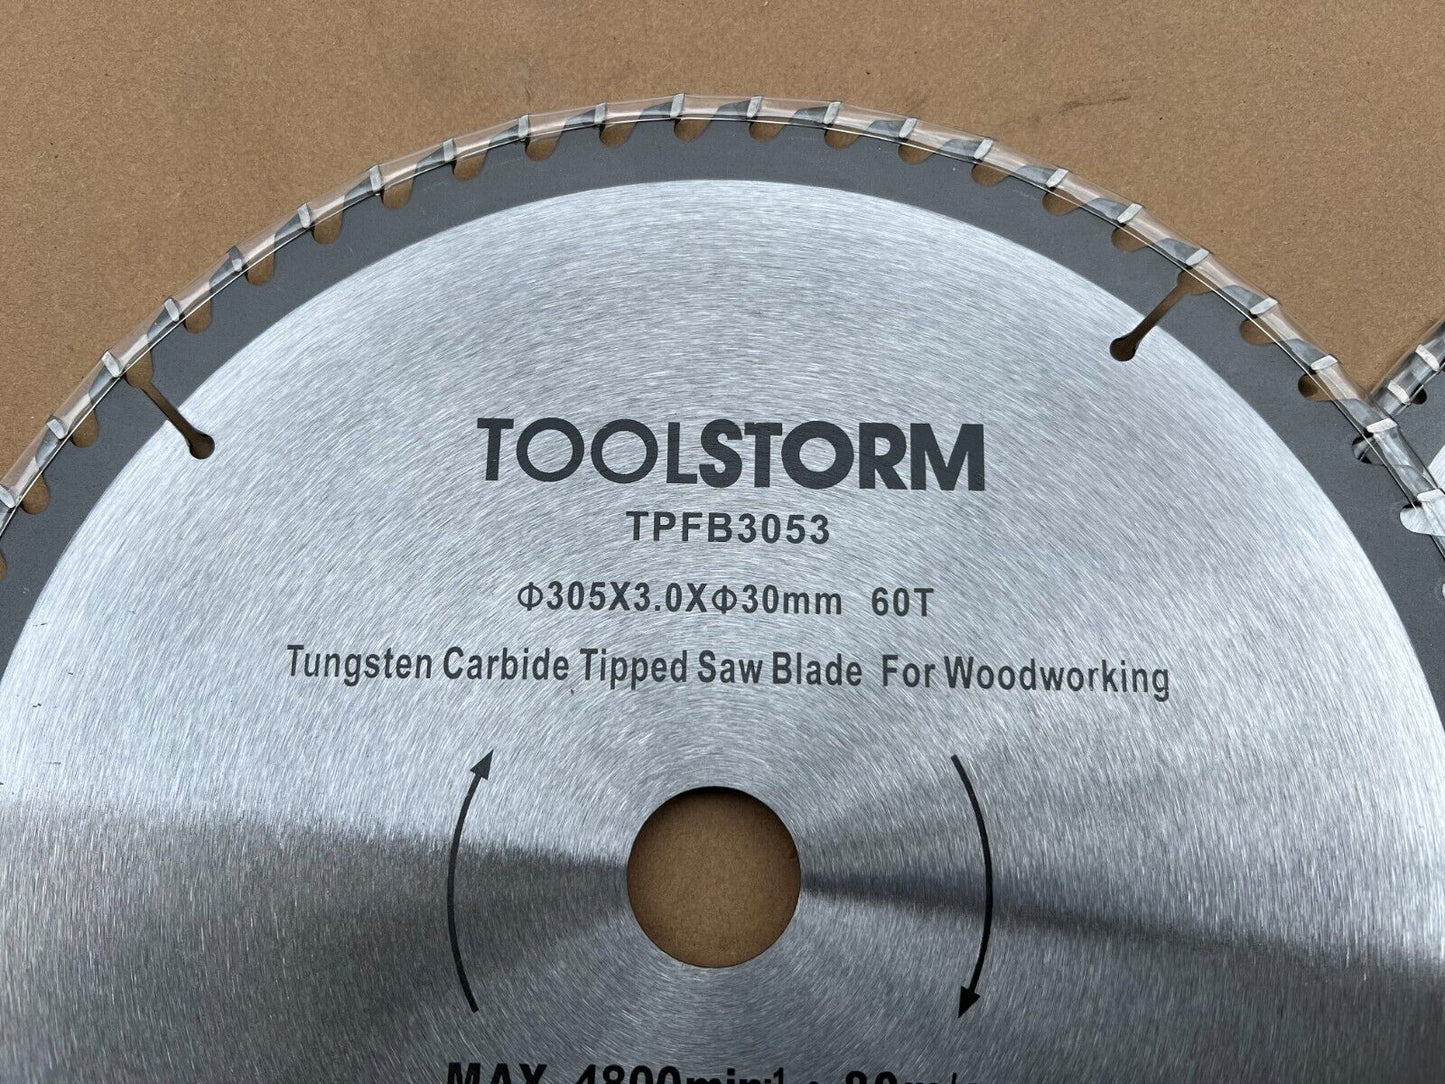 2PC TCT Drop Saw/Compound Mitre Saw Blade 12" 305mm 60T FOR TIMBER 100T FOR Alum